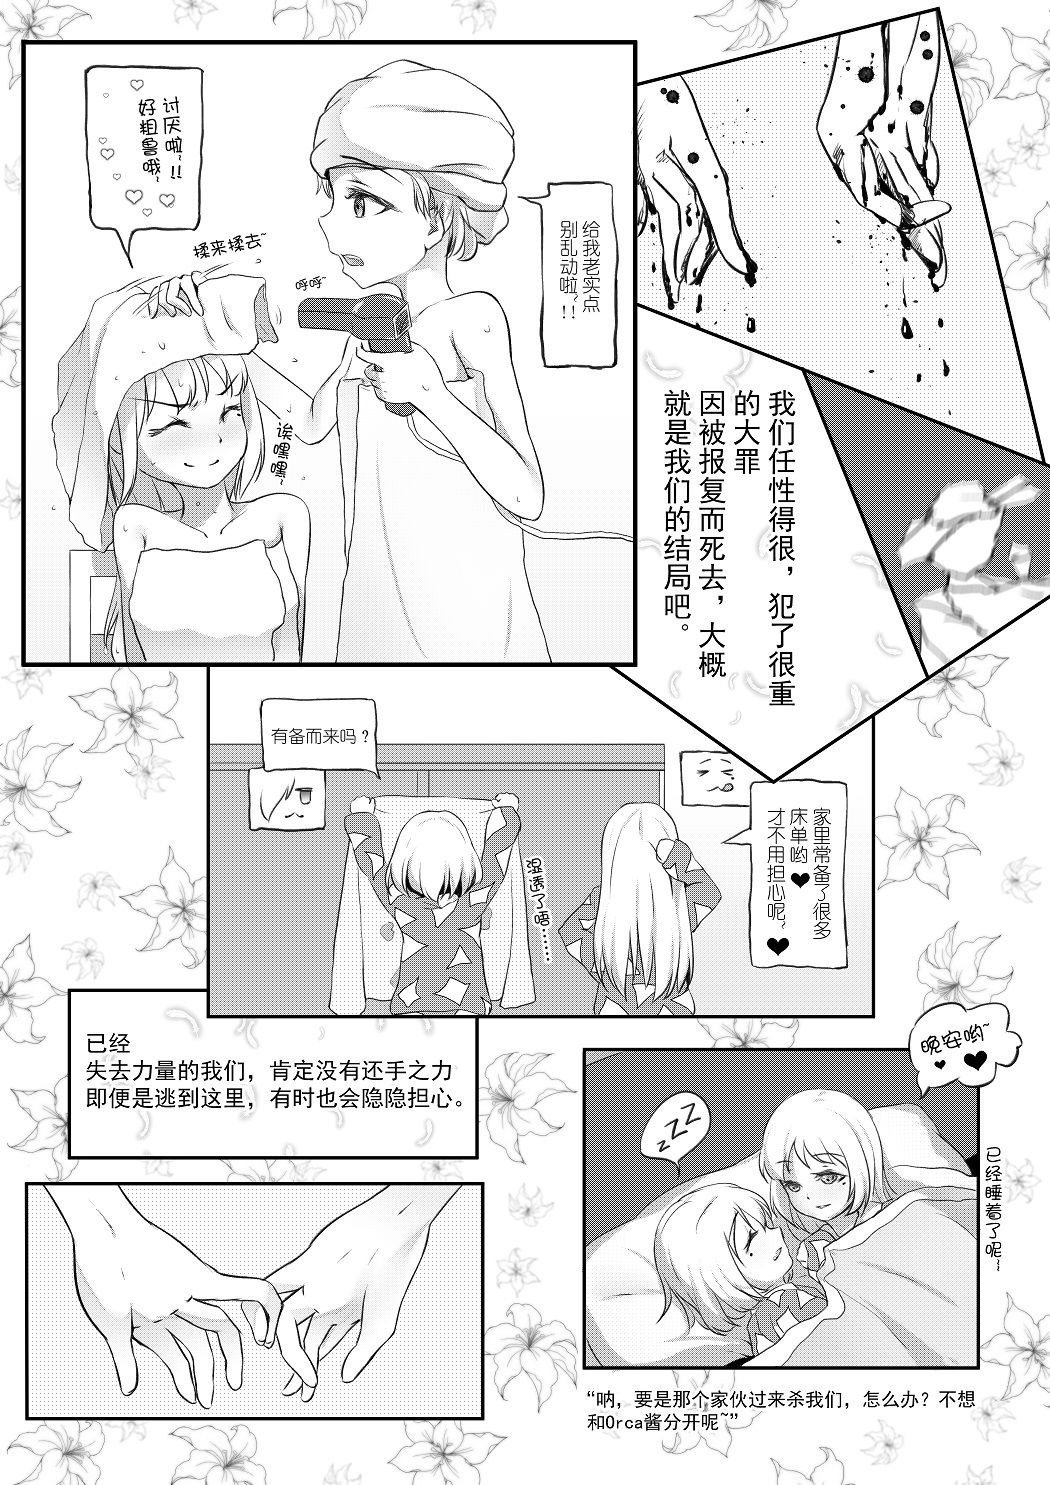 [an-telin] Pure White (MapleStory) [Chinese] [an-telin] Pure White (MapleStory) [中国語]